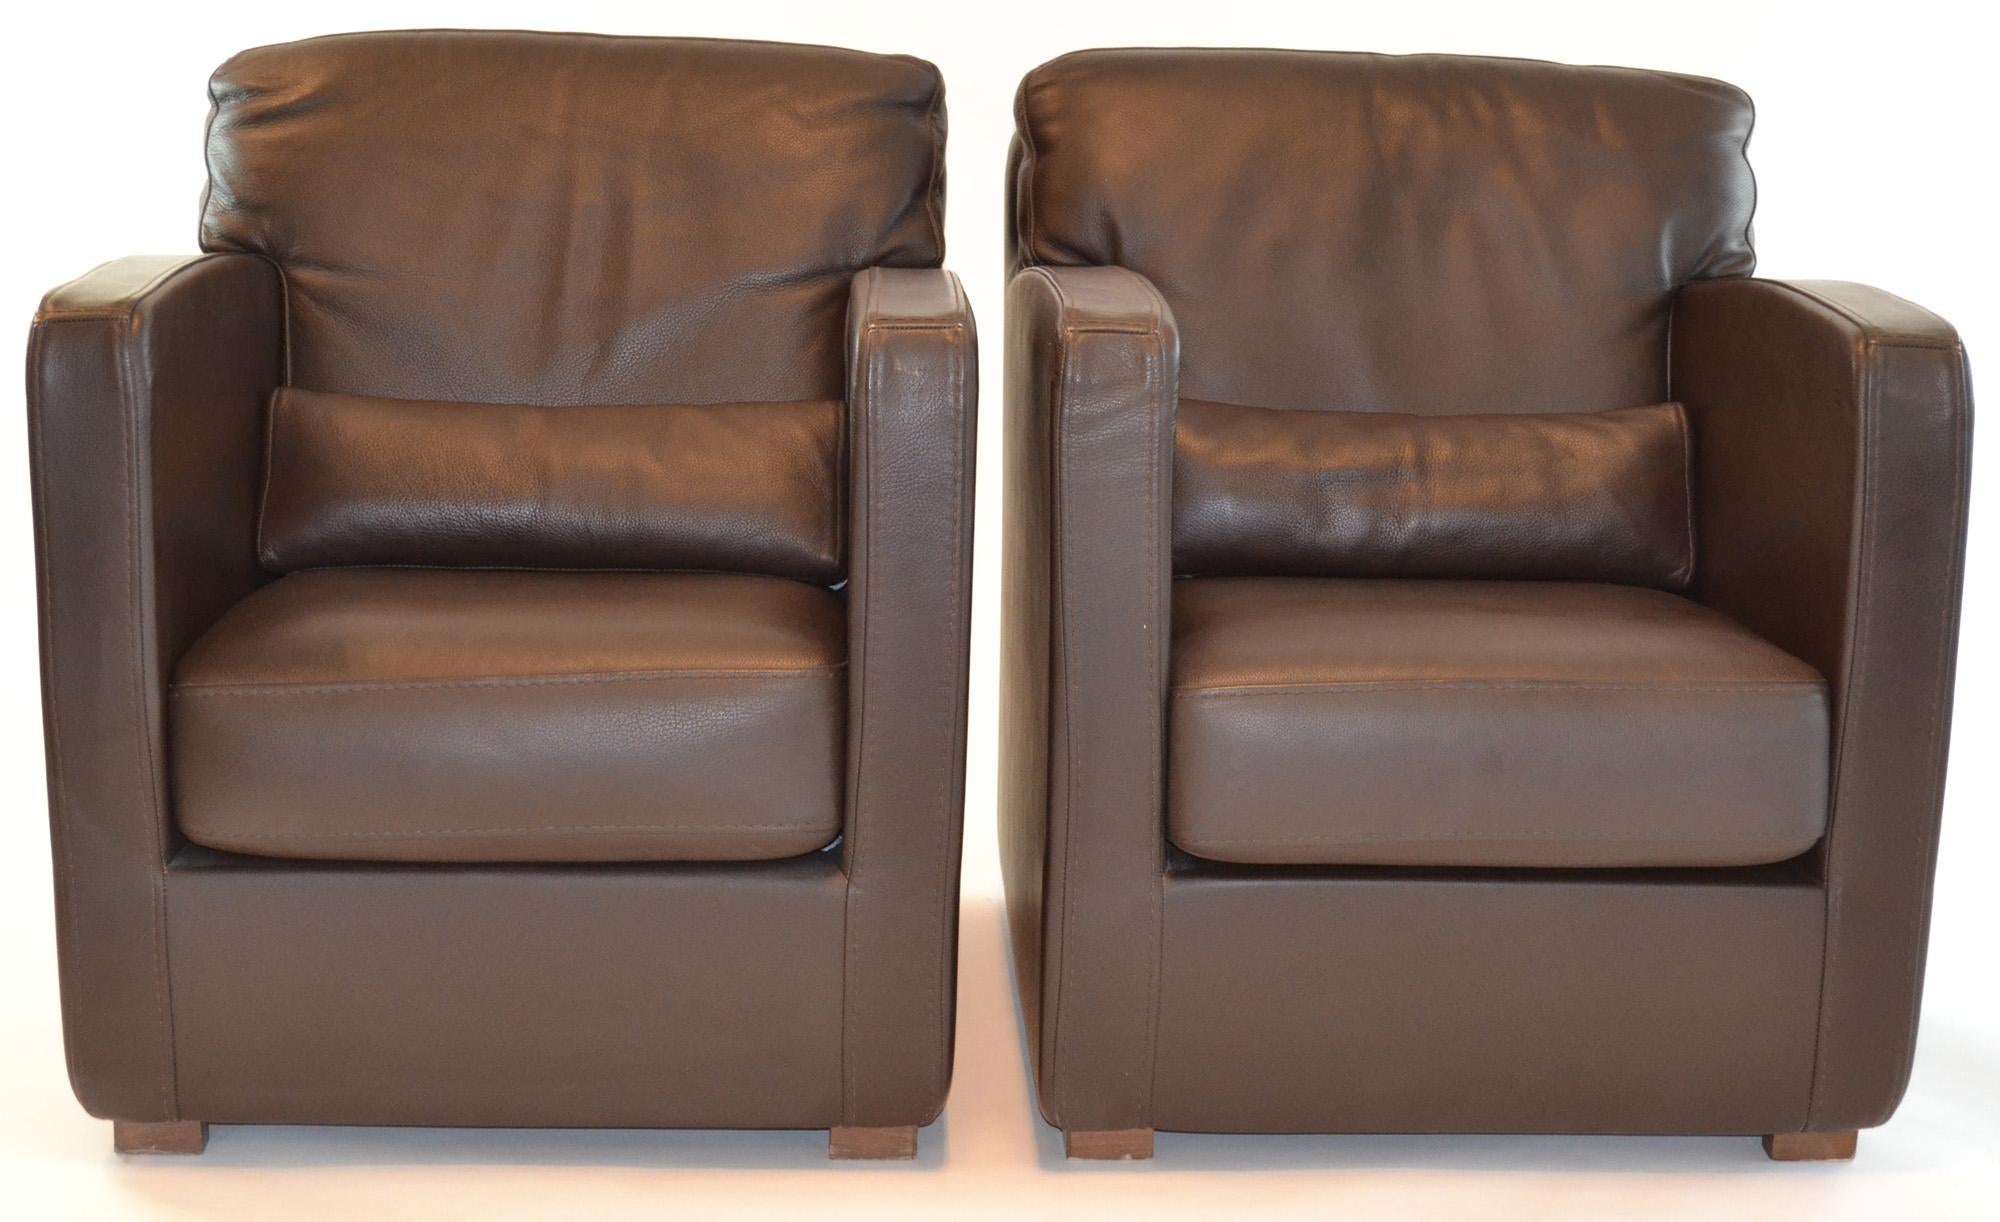 Pair of leather arm or club chairs by Roche Bobois in supple brown leather. Comfortable, diminutive yet masculine and adaptable. Lumbar roll. Wood slab feet. Signed.